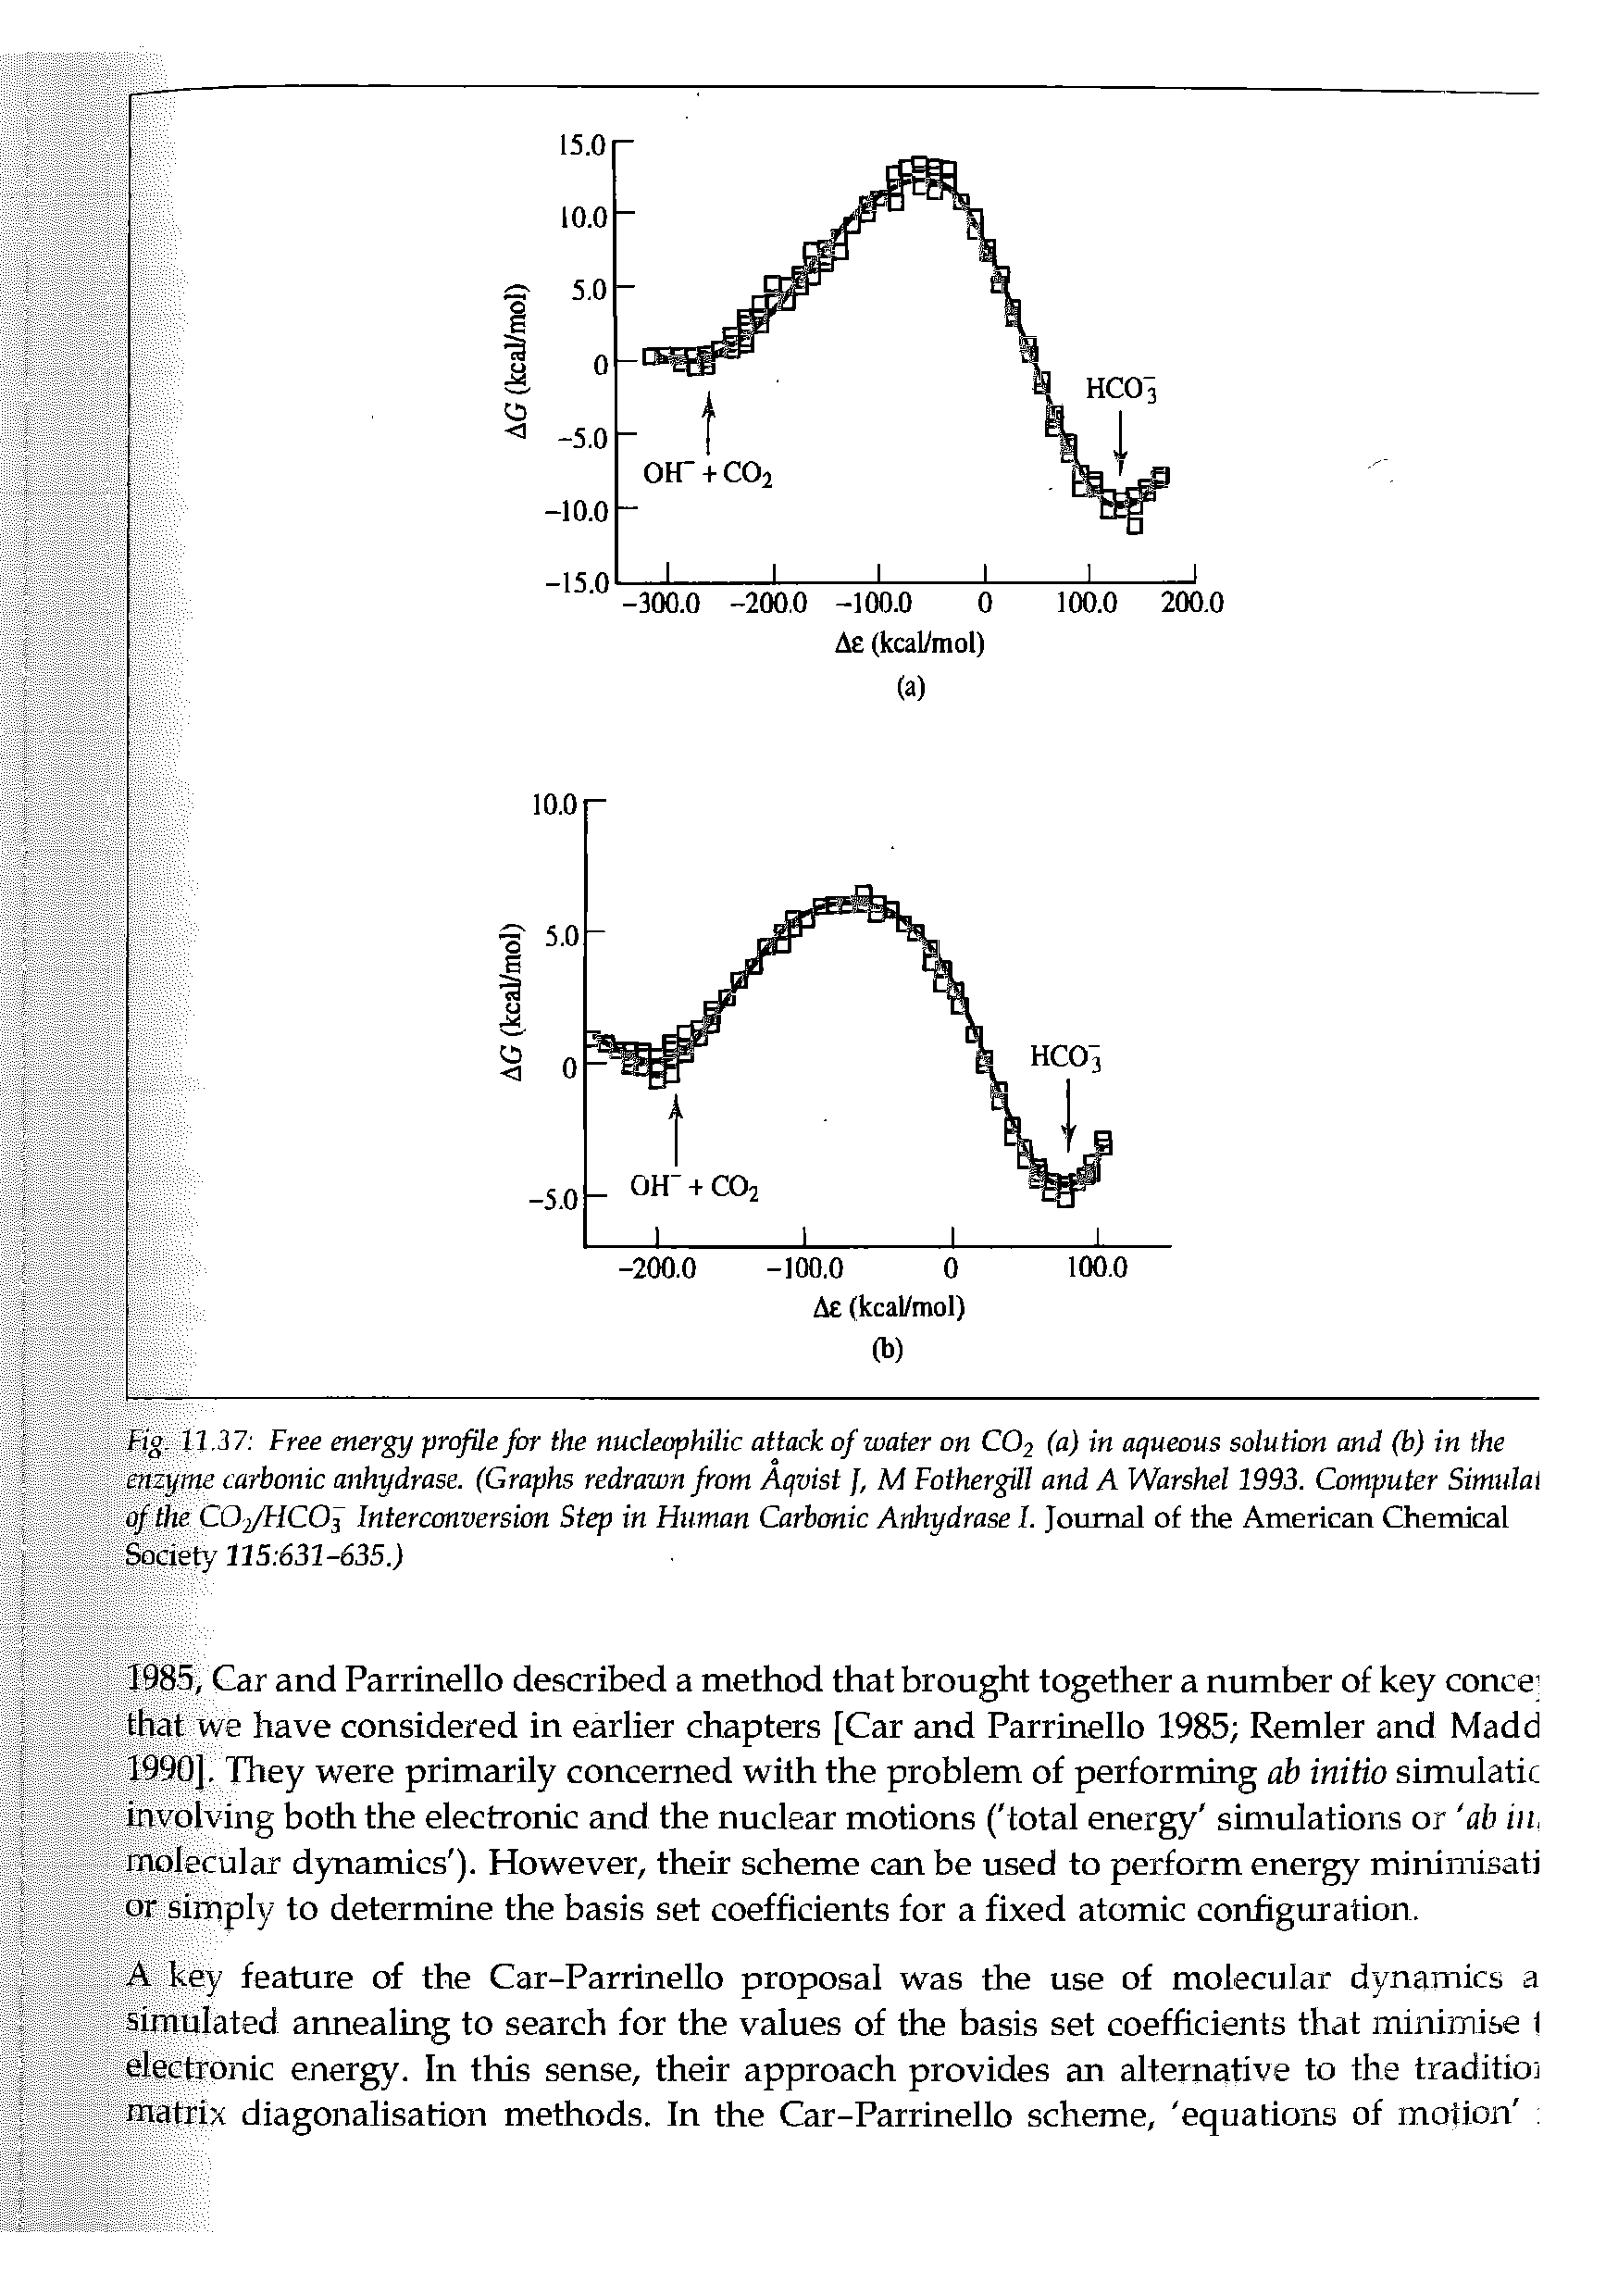 Fig. 11.37 Free energy profile for the nucleophilic attack of water on CO2 (a) in aqueous solution and (b) in the enzyme carbonic anhydrase. (Graphs redrawn from Aqvist J, M Fothergill and A Warshel 1993. Computer Simulai of the COj/HCOf Interconversion Step in Human Carbonic Anhydrase I. Journal of the American Chemical Society 115 631-635.)...